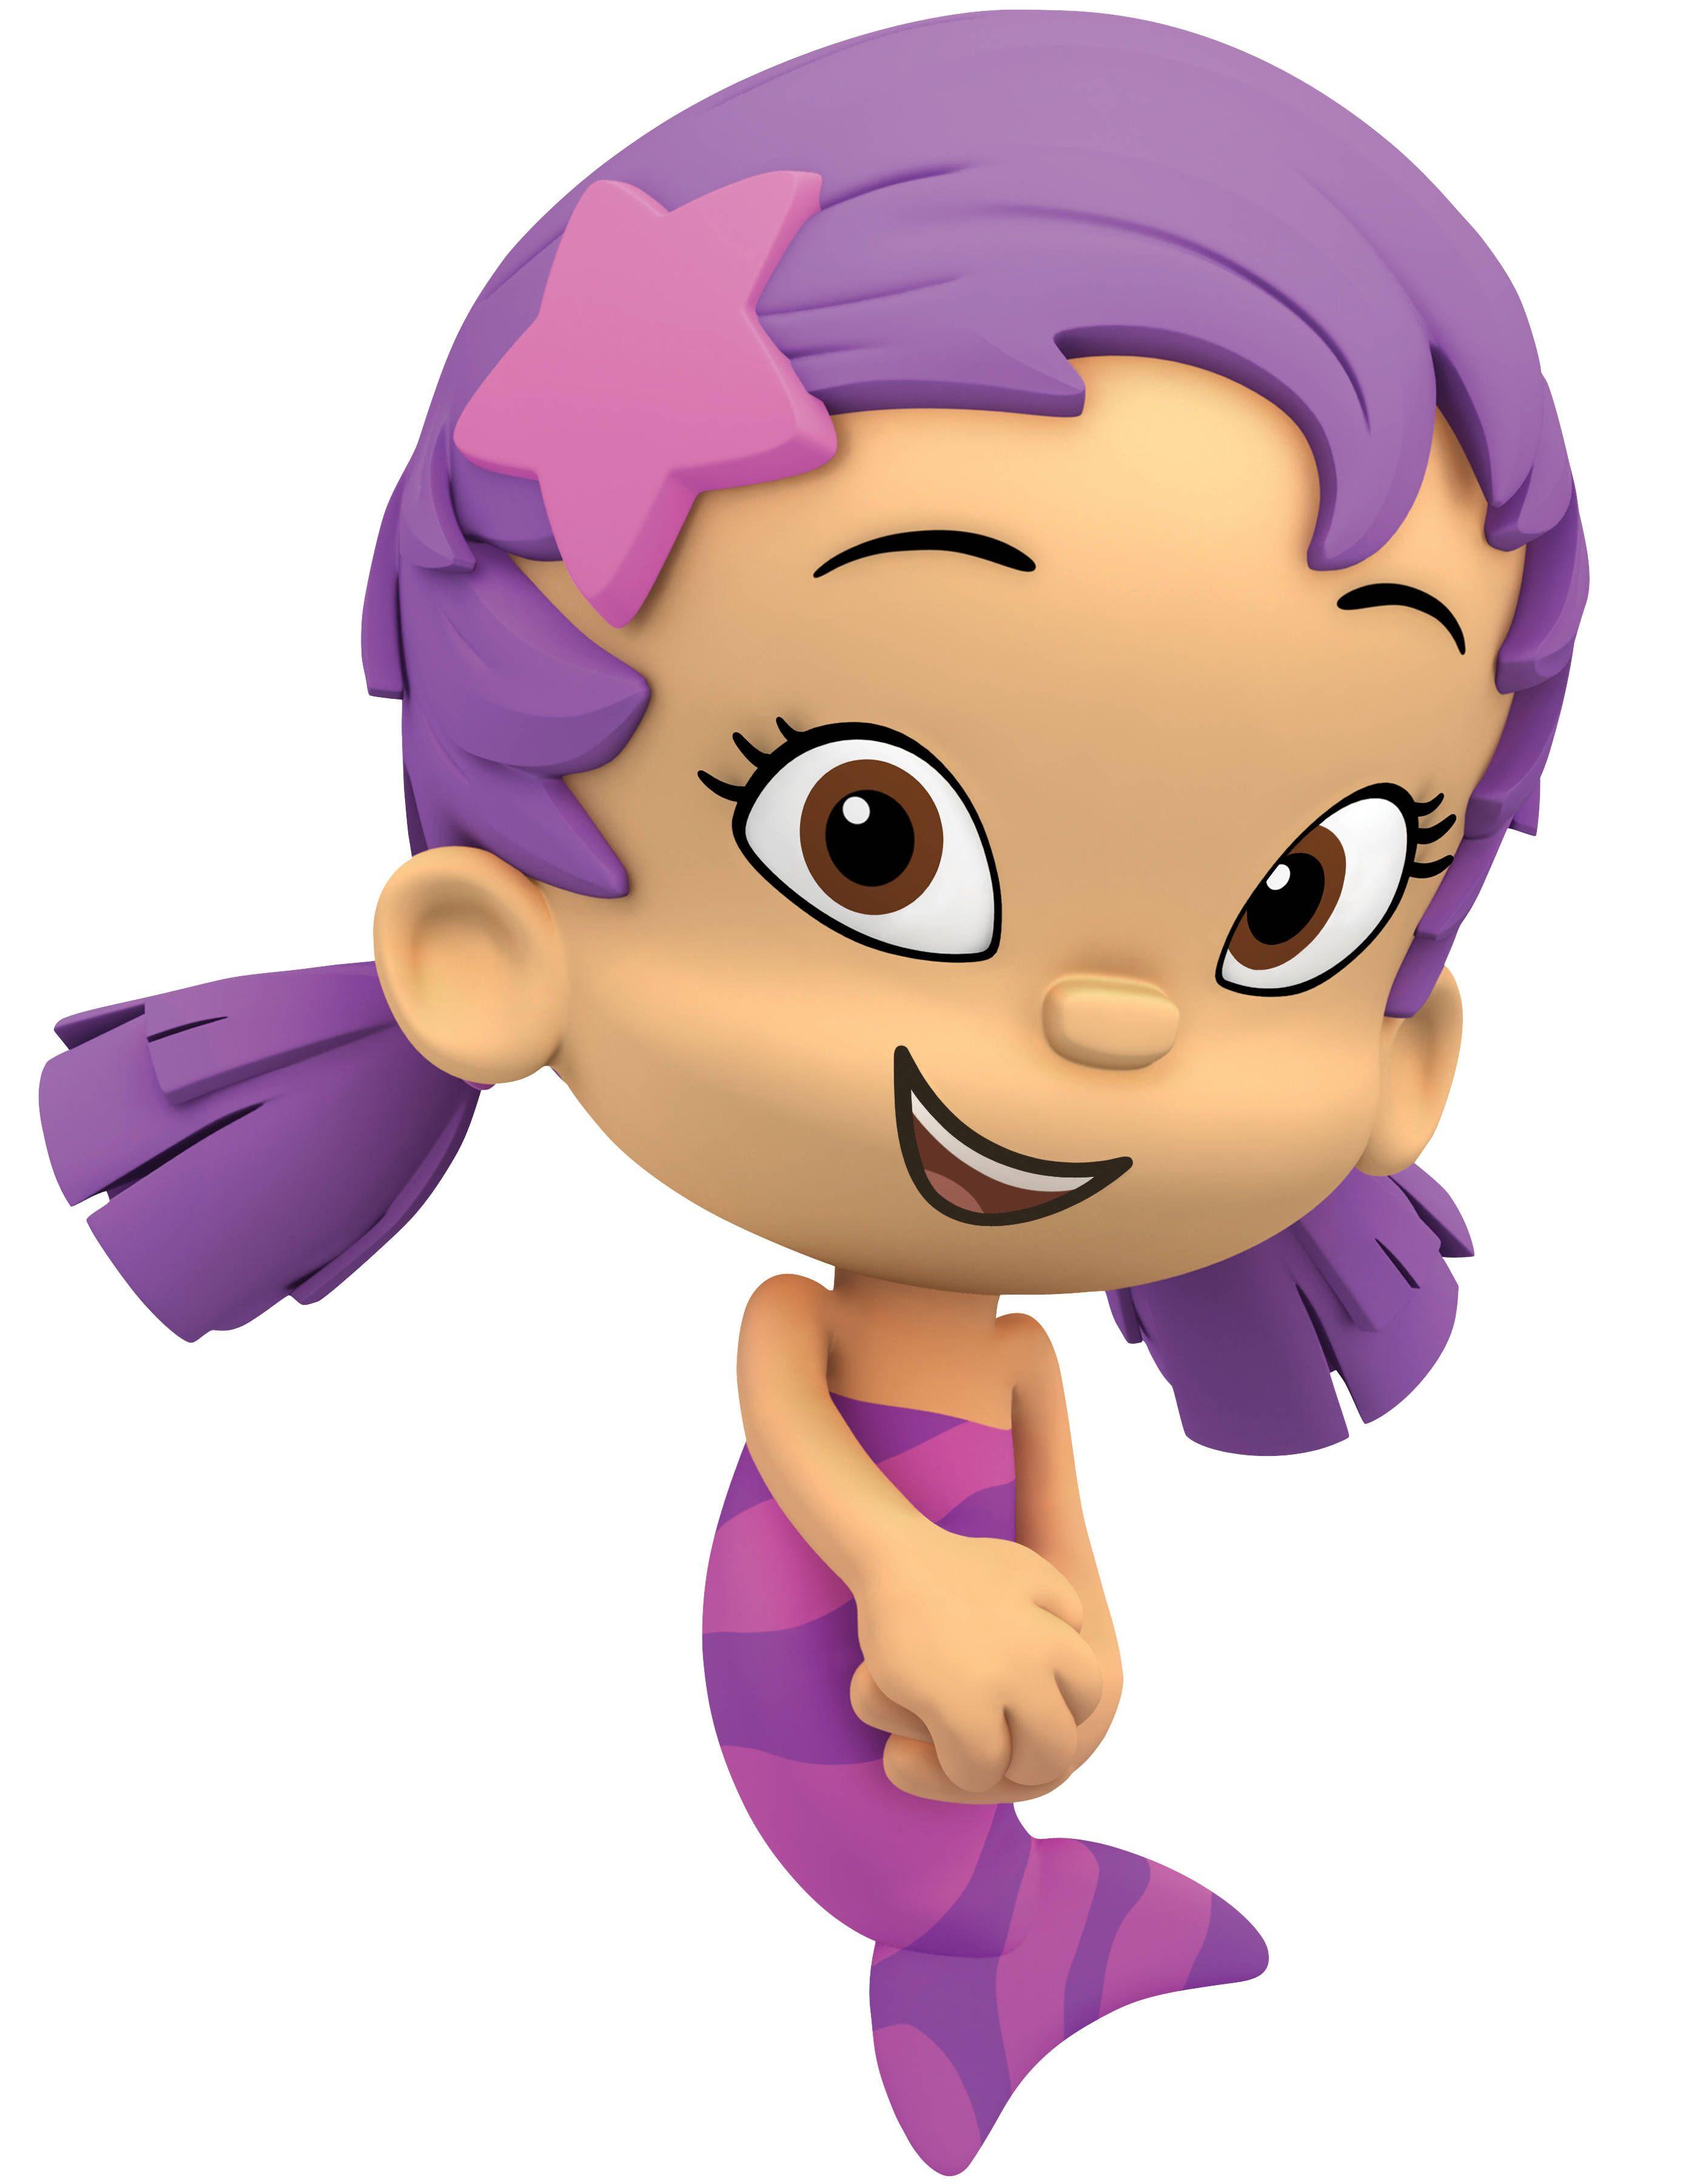 Bubble Guppies PNG HD Transparent Bubble Guppies HD.PNG Image